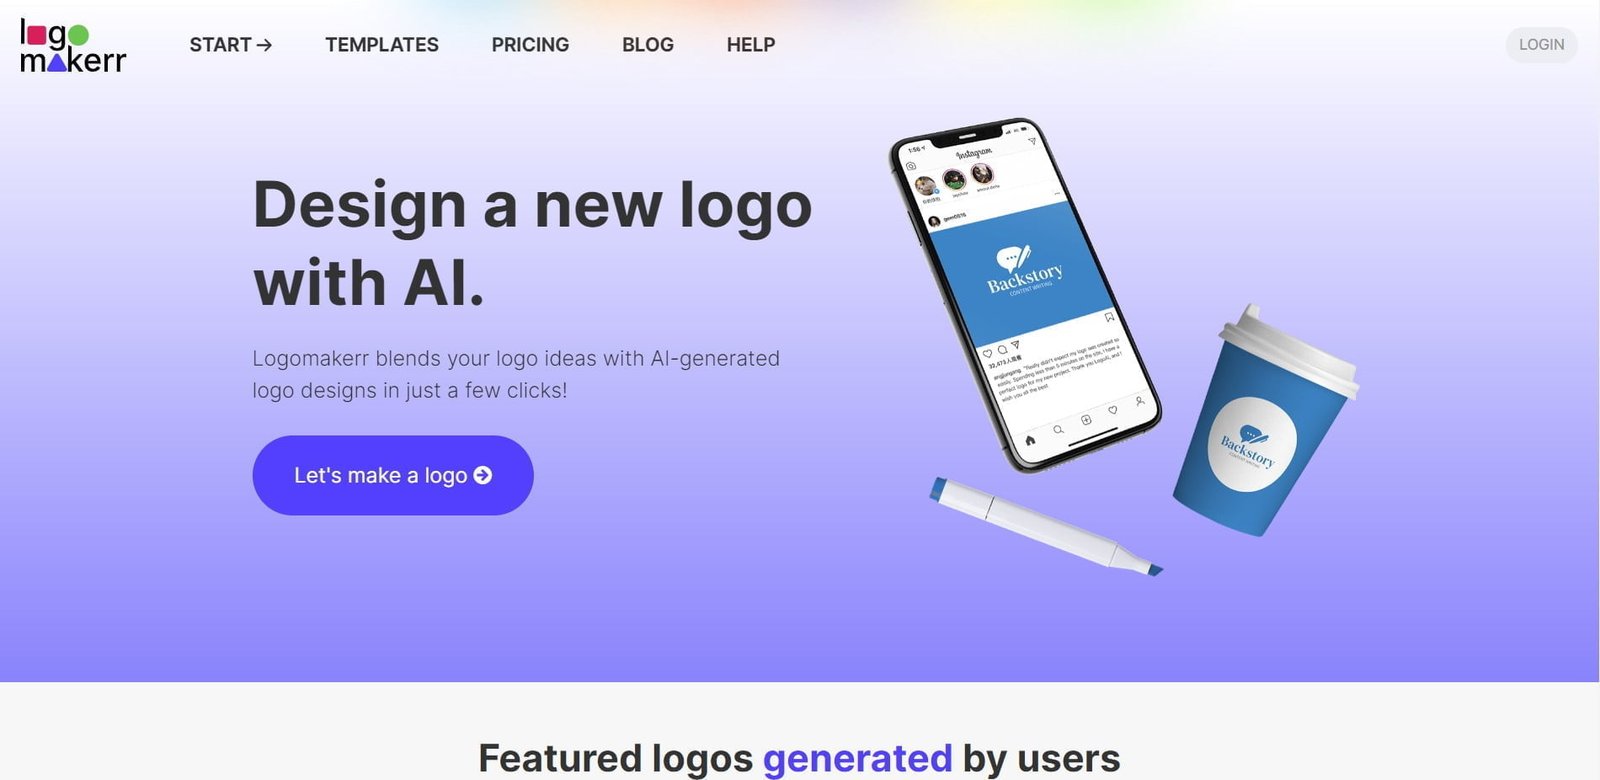 Logo Makerr is an logo AI design tool that allows users to create AI-generated professional logos tailored to their business needs